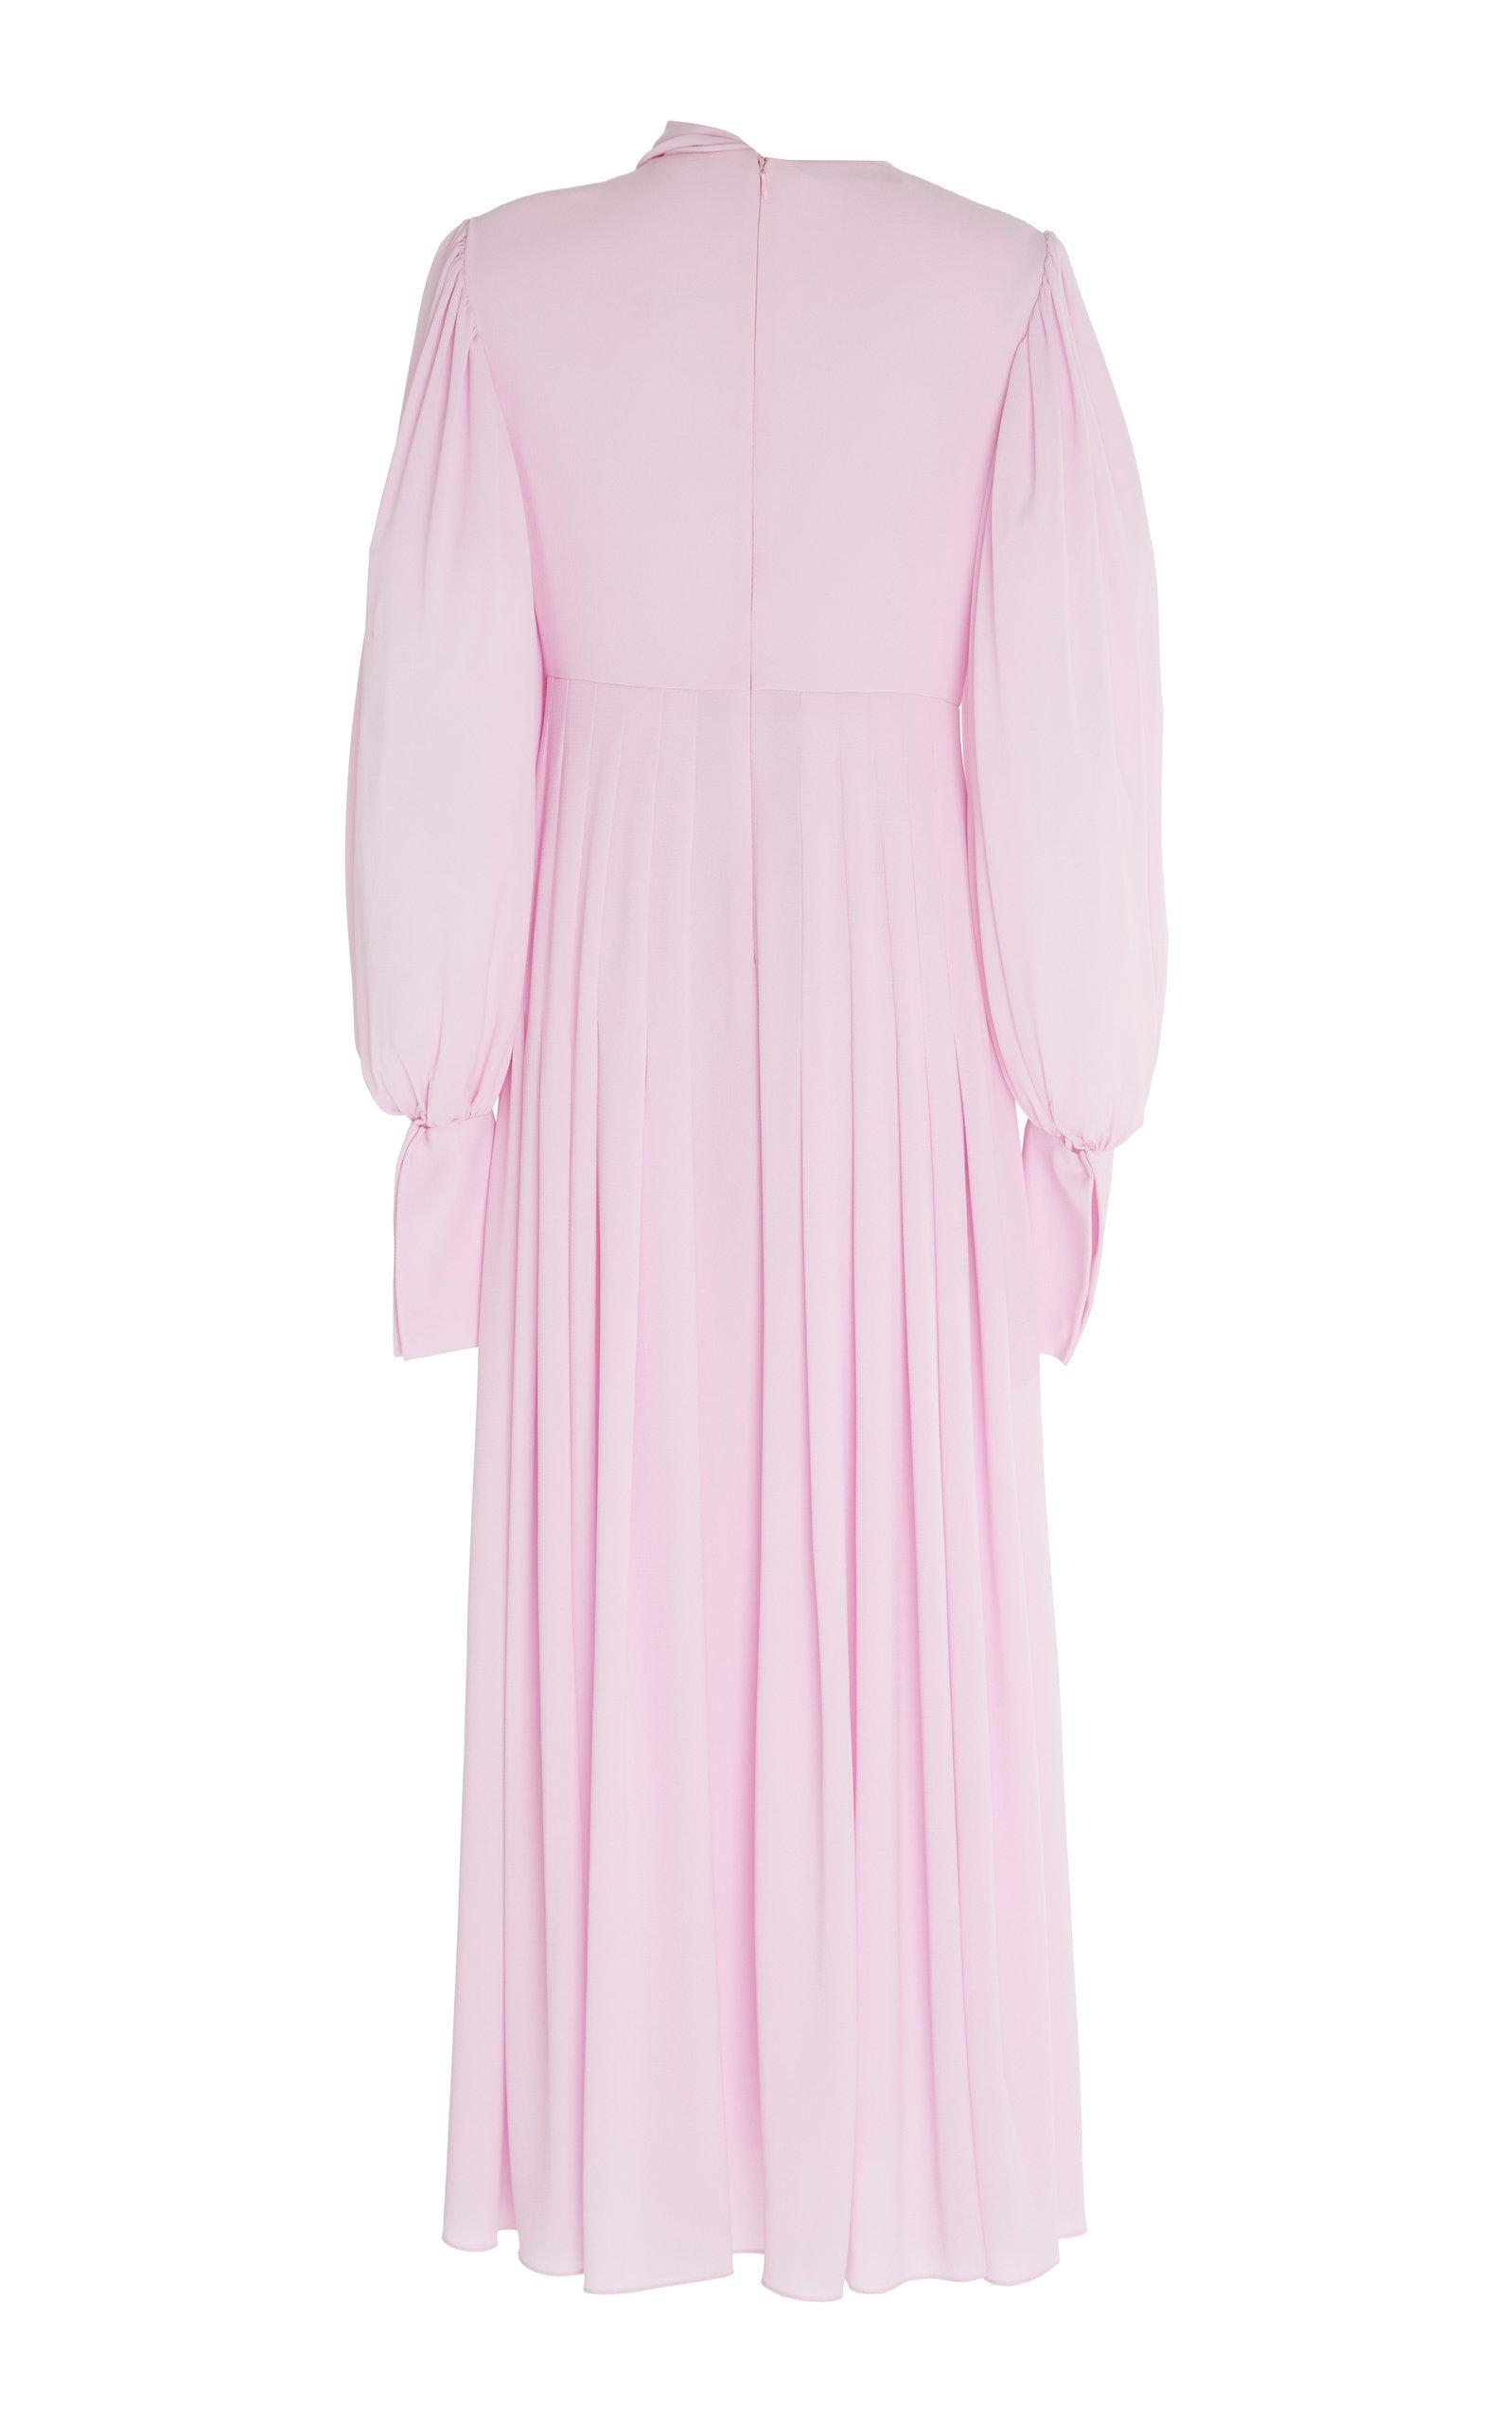 Emilia Wickstead Synthetic Roselle Long-sleeve Crepe Dress in Pink - Lyst